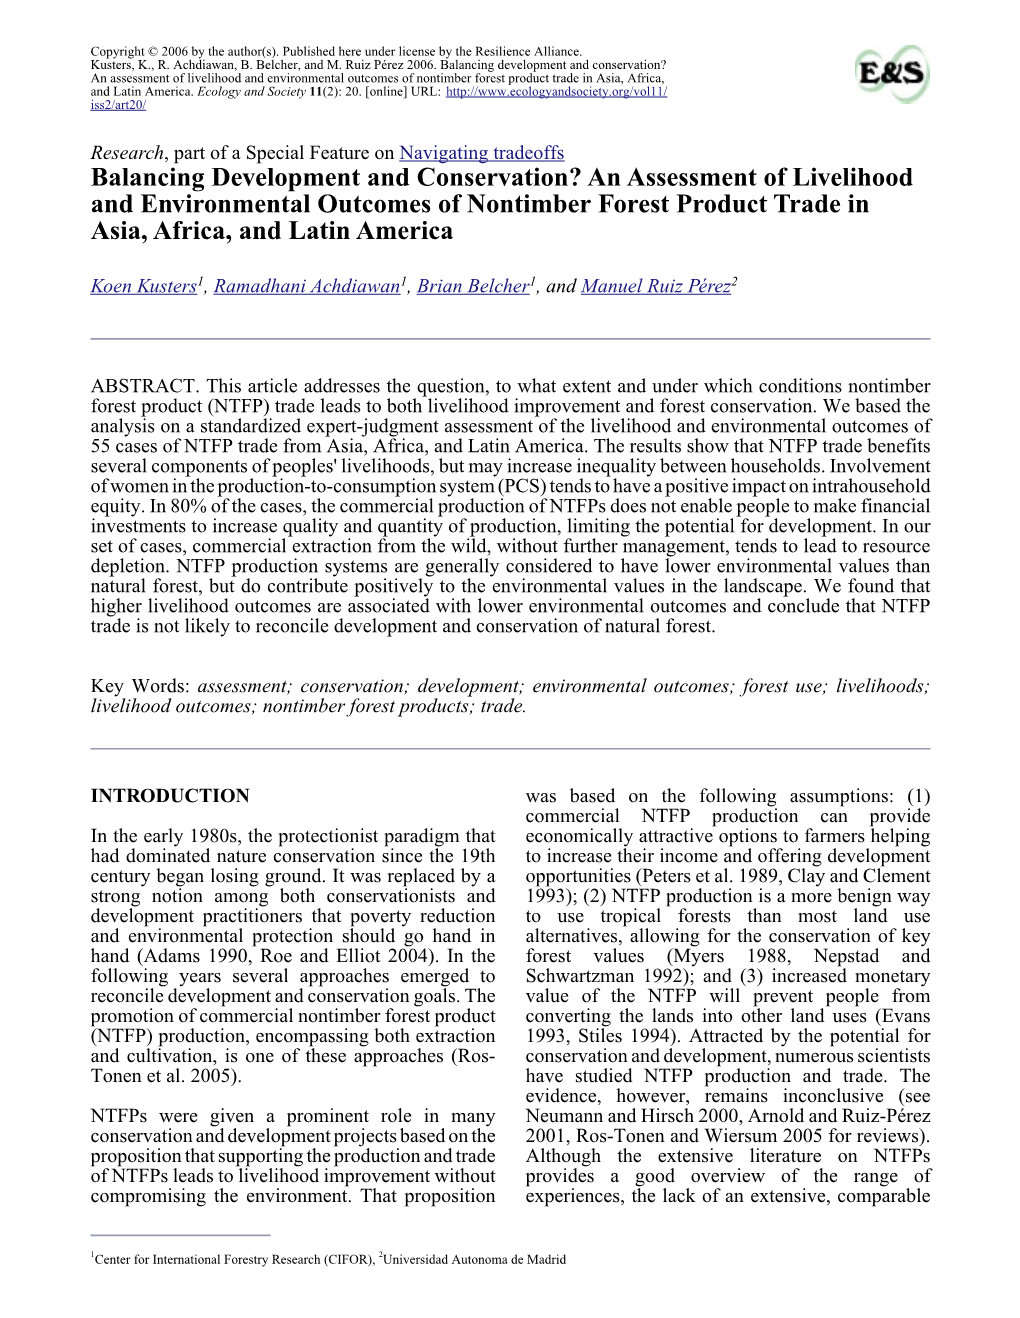 An Assessment of Livelihood and Environmental Outcomes of Nontimber Forest Product Trade in Asia, Africa, and Latin America